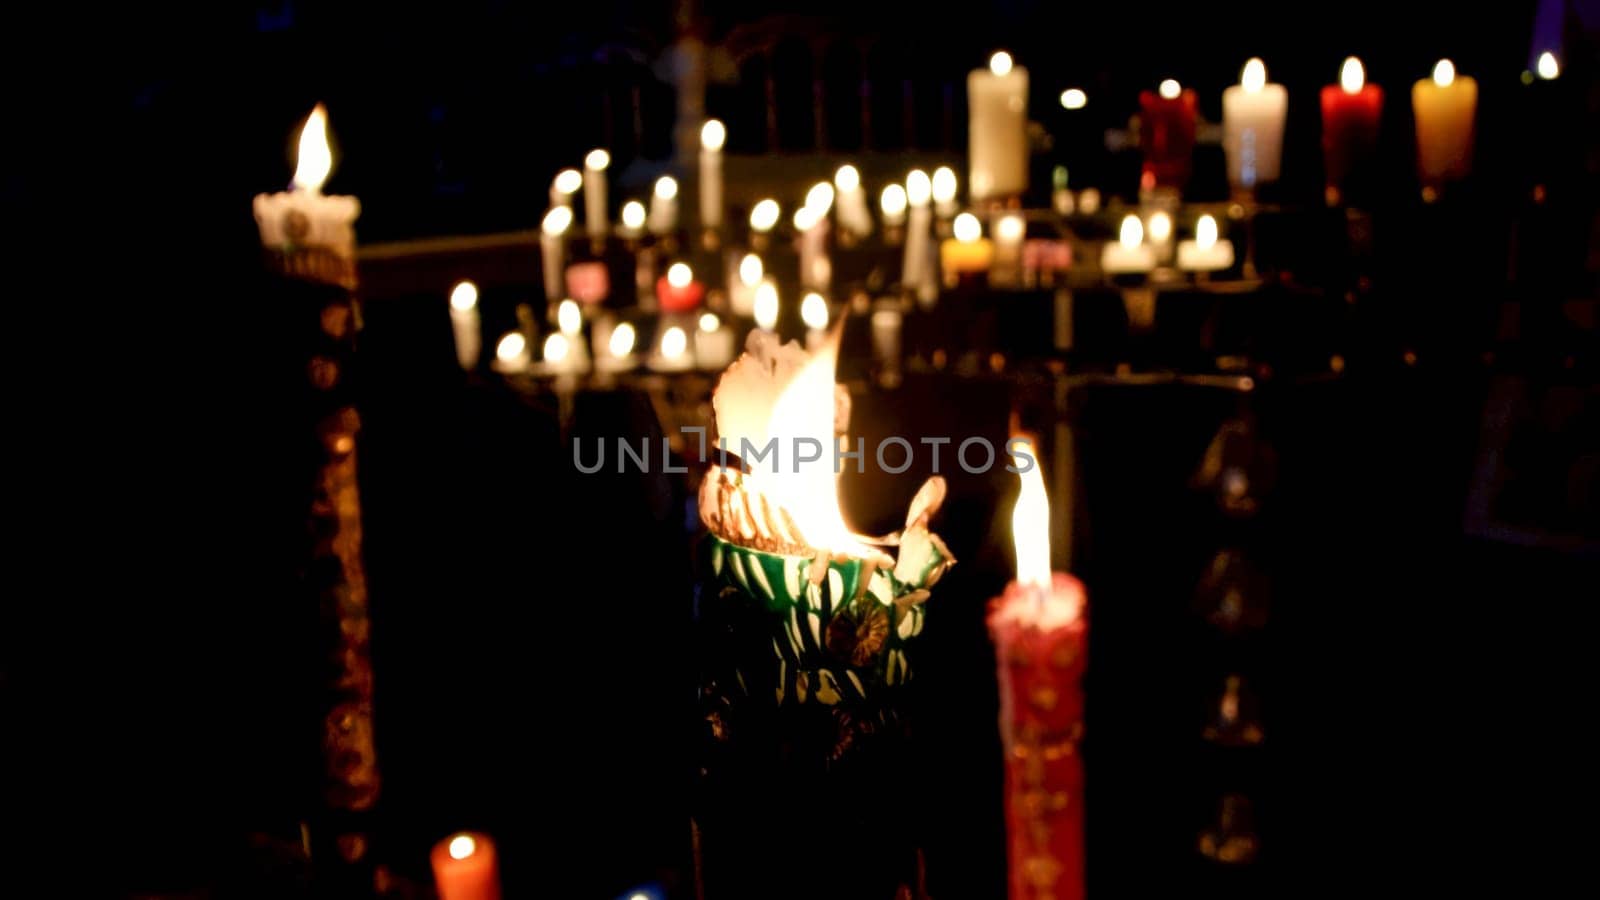 Illuminated candles in dark ambiance by Peruphotoart